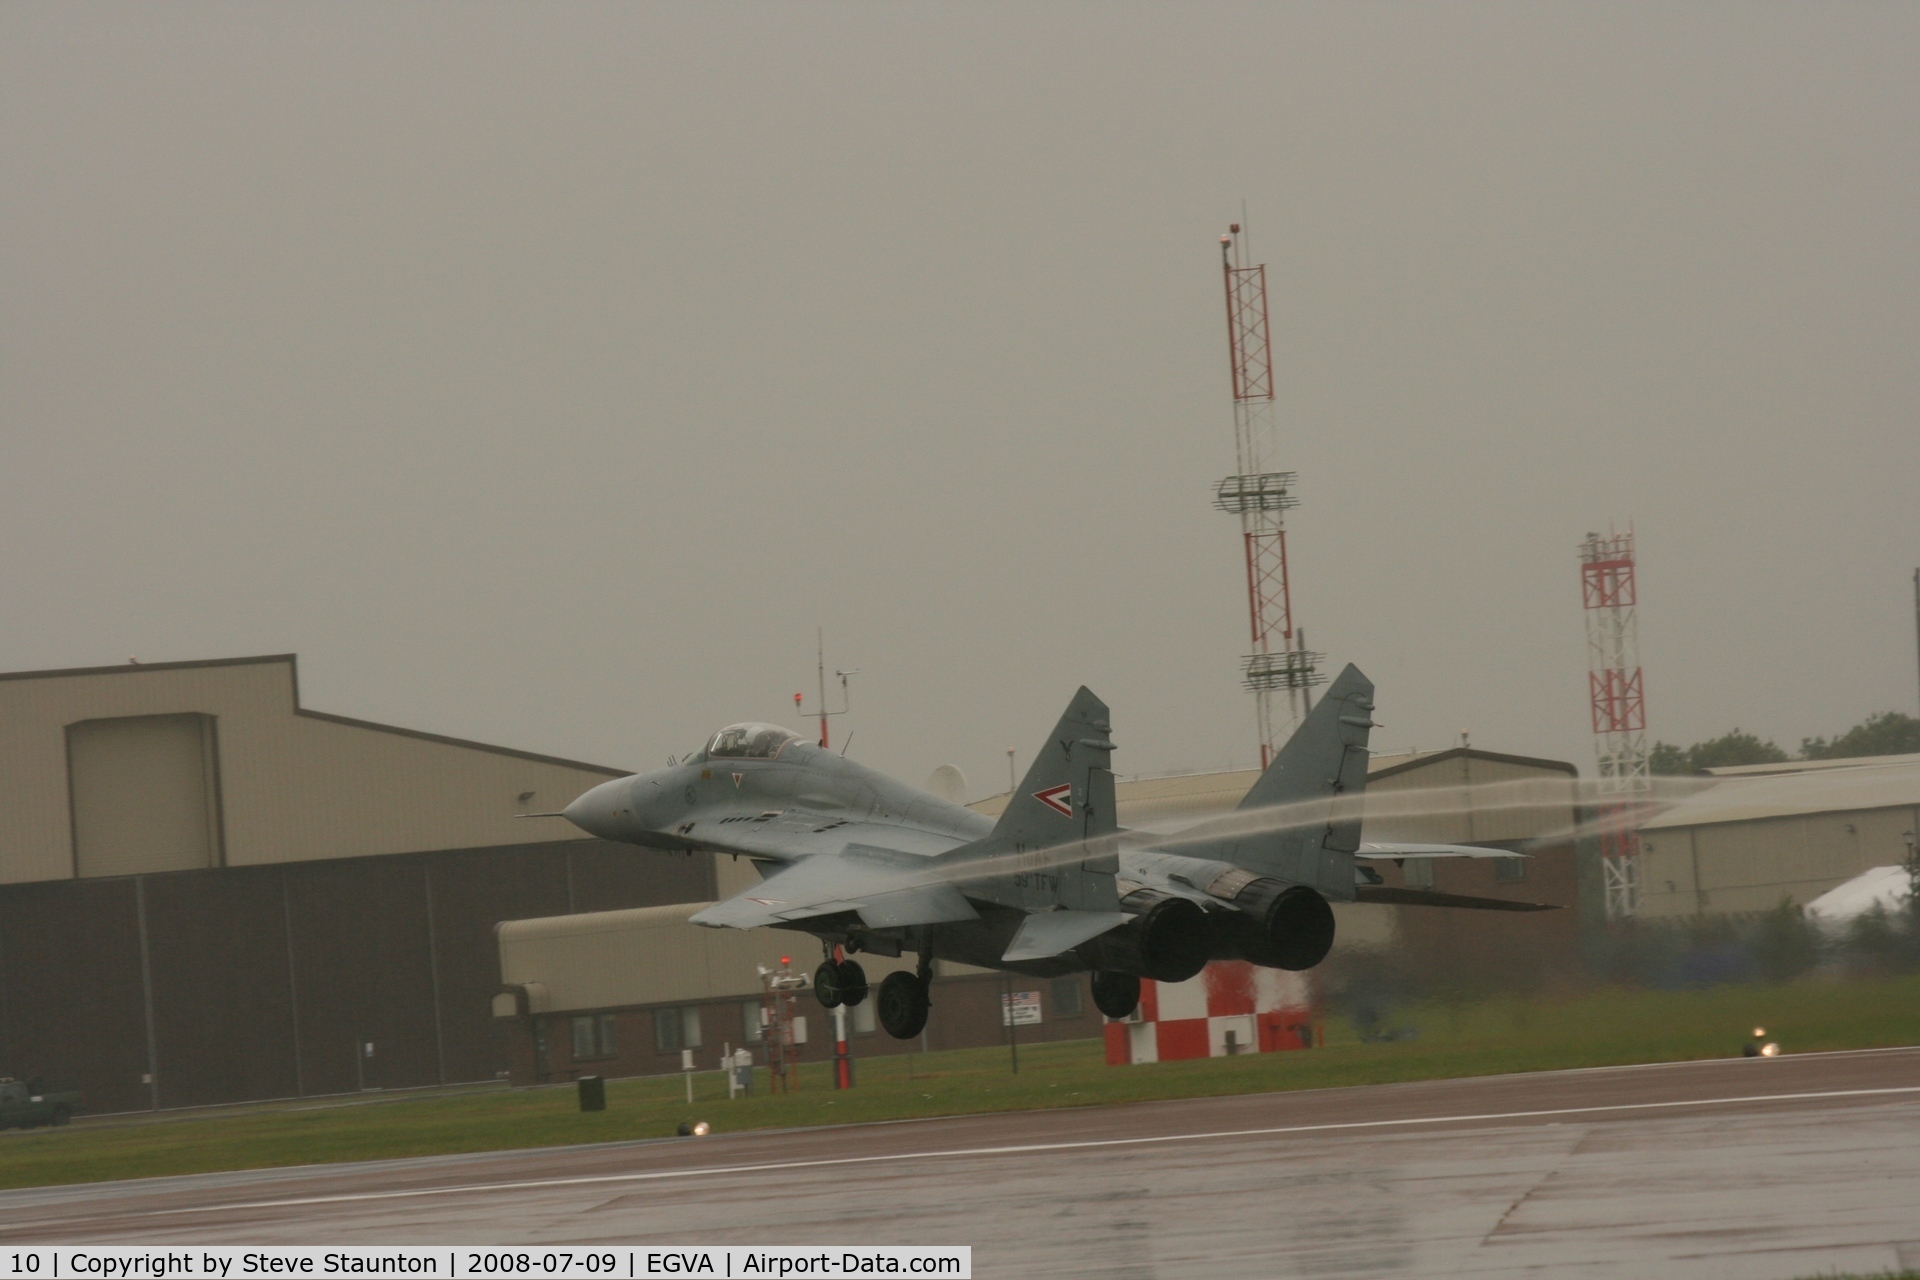 10, Mikoyan-Gurevich MiG-29B C/N 2960535158, Taken at the Royal International Air Tattoo 2008 during arrivals and departures (show days cancelled due to bad weather)